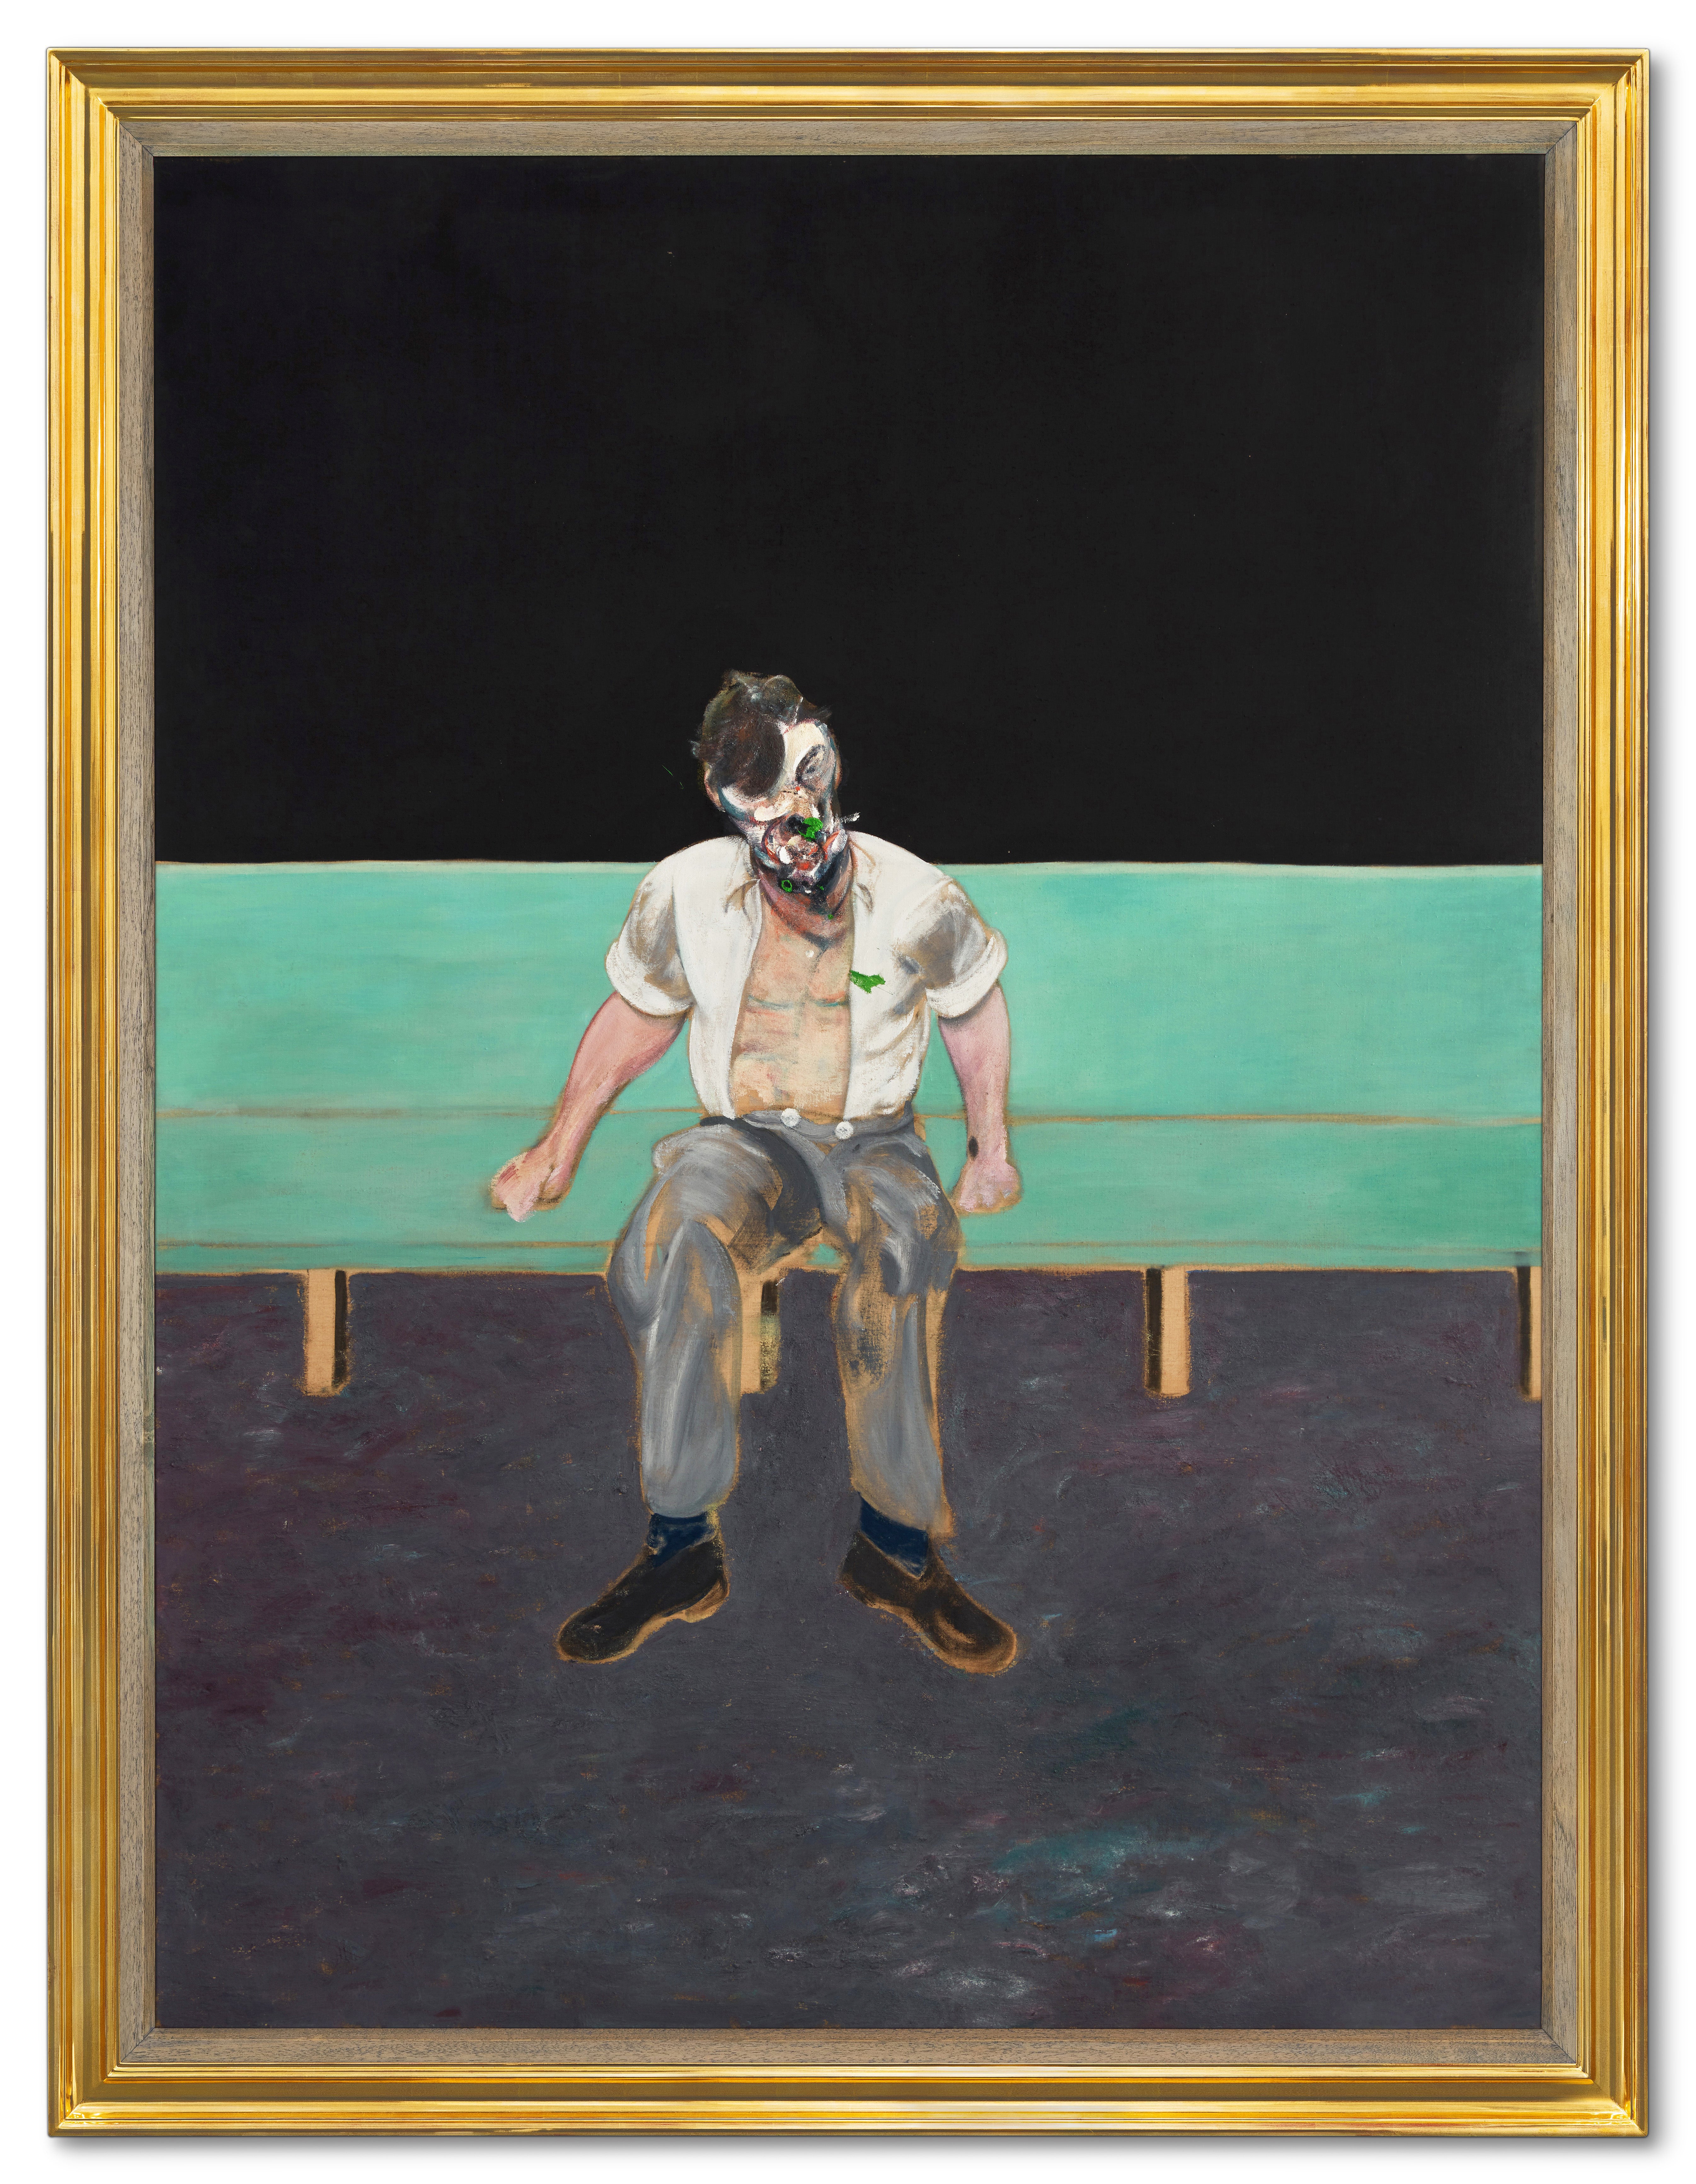 Francis Bacon’s Study for Portrait of Lucian Freud, 1964, is extimated to reach in excess of £34m